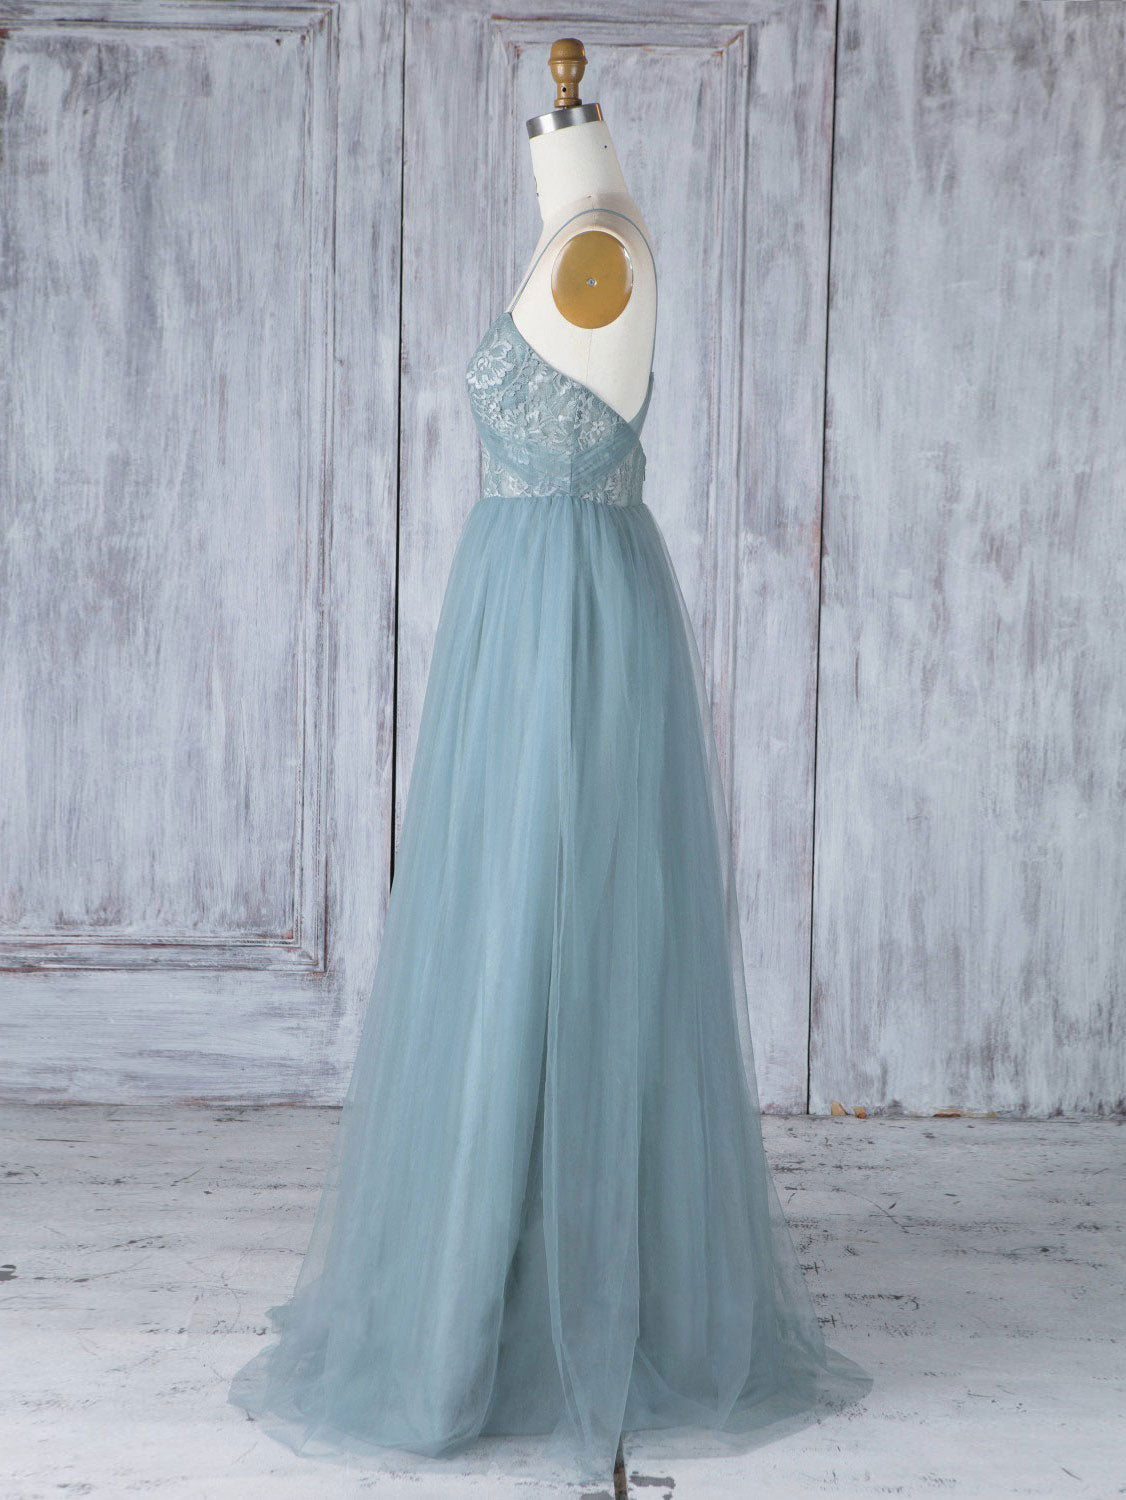 Formal Dresses Cocktail, Simple Sweetheart Neck Tulle Lace Long Prom Dresses, Gray Blue Bridesmaid Dresses